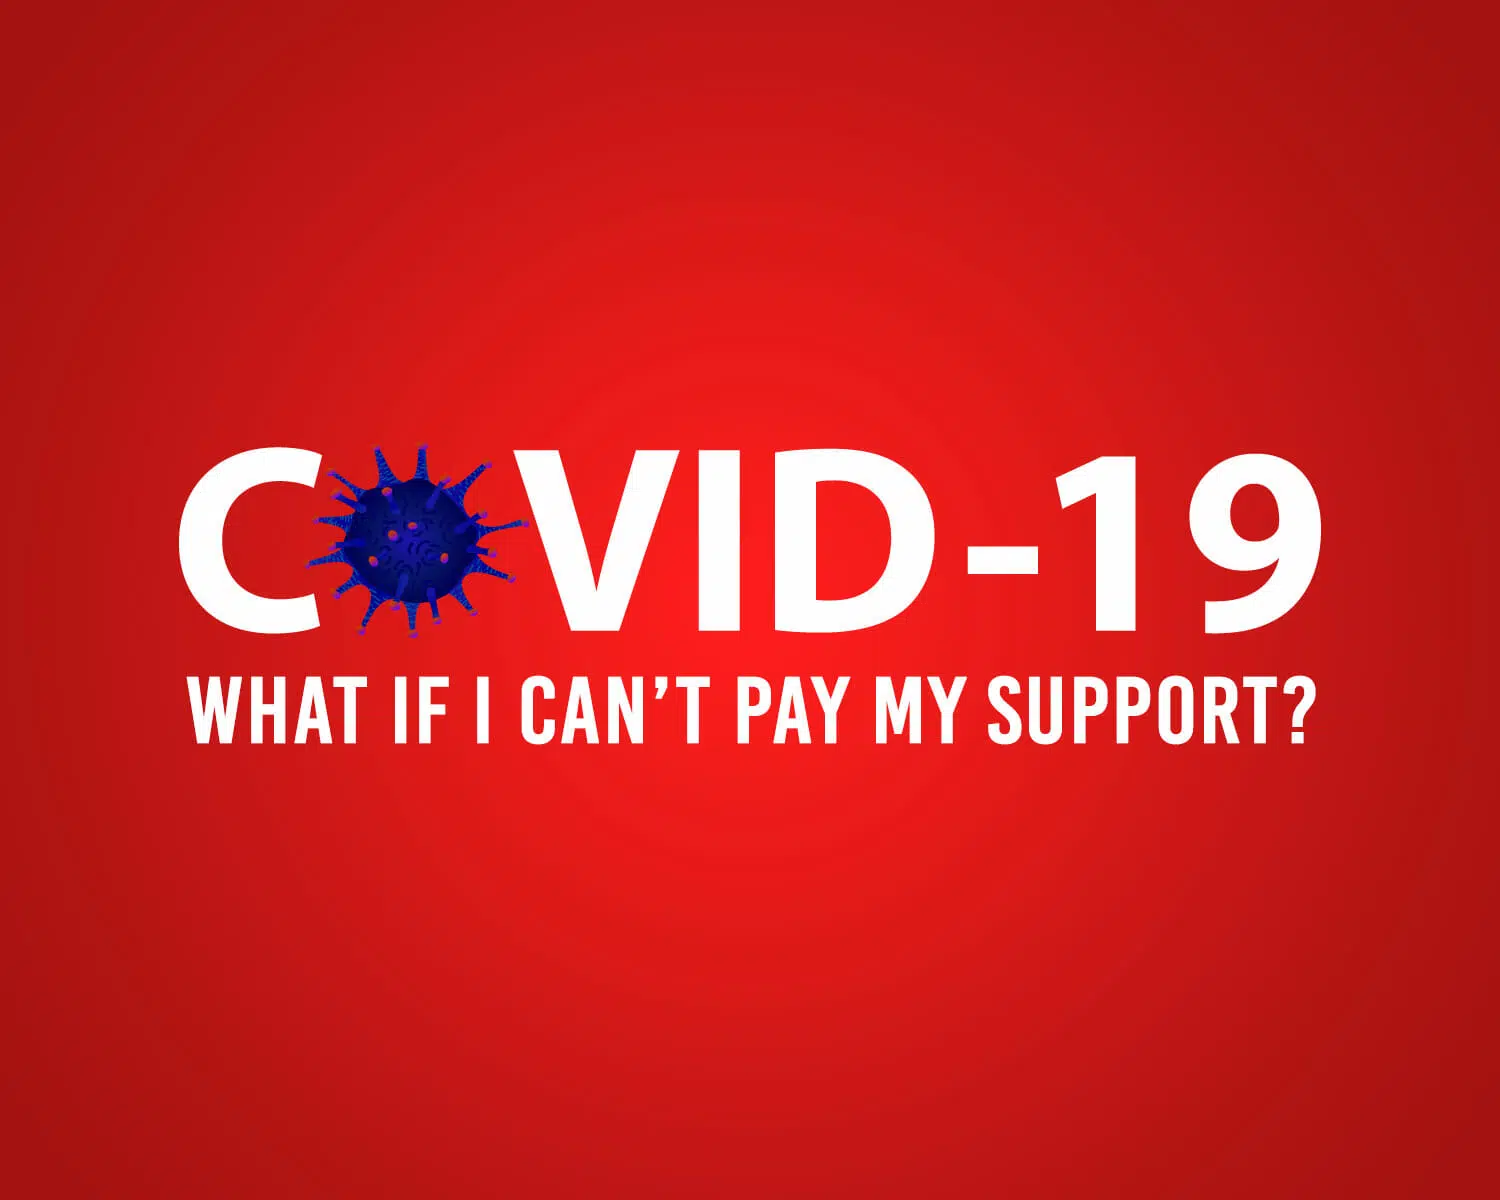 COVID-19 and loss of pay - what if I can't pay my support?